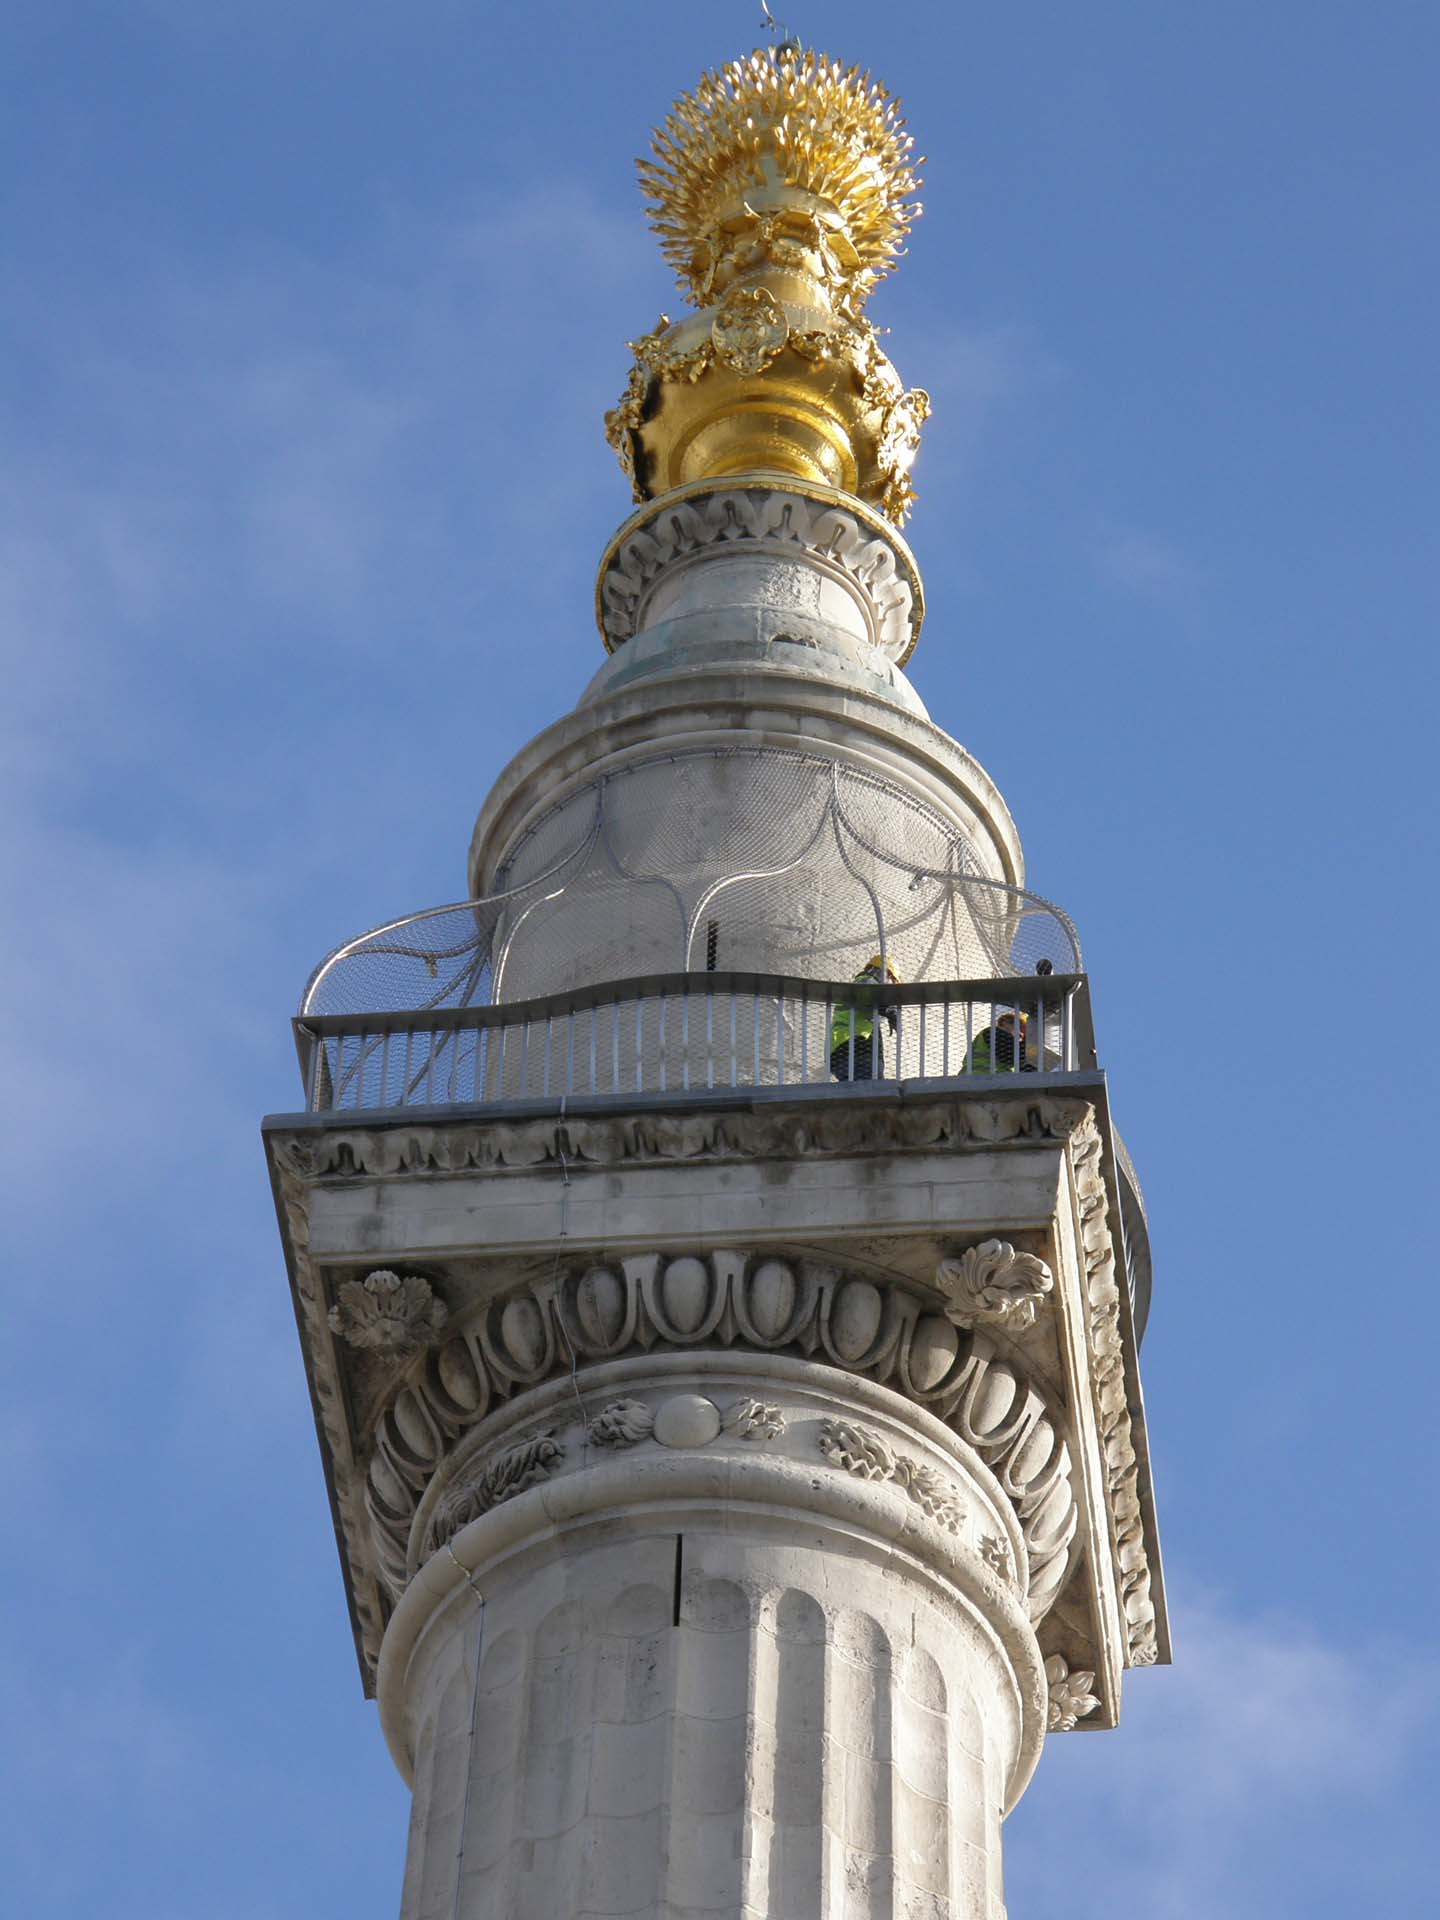 Transparent Webnet securing Monument Tower in London